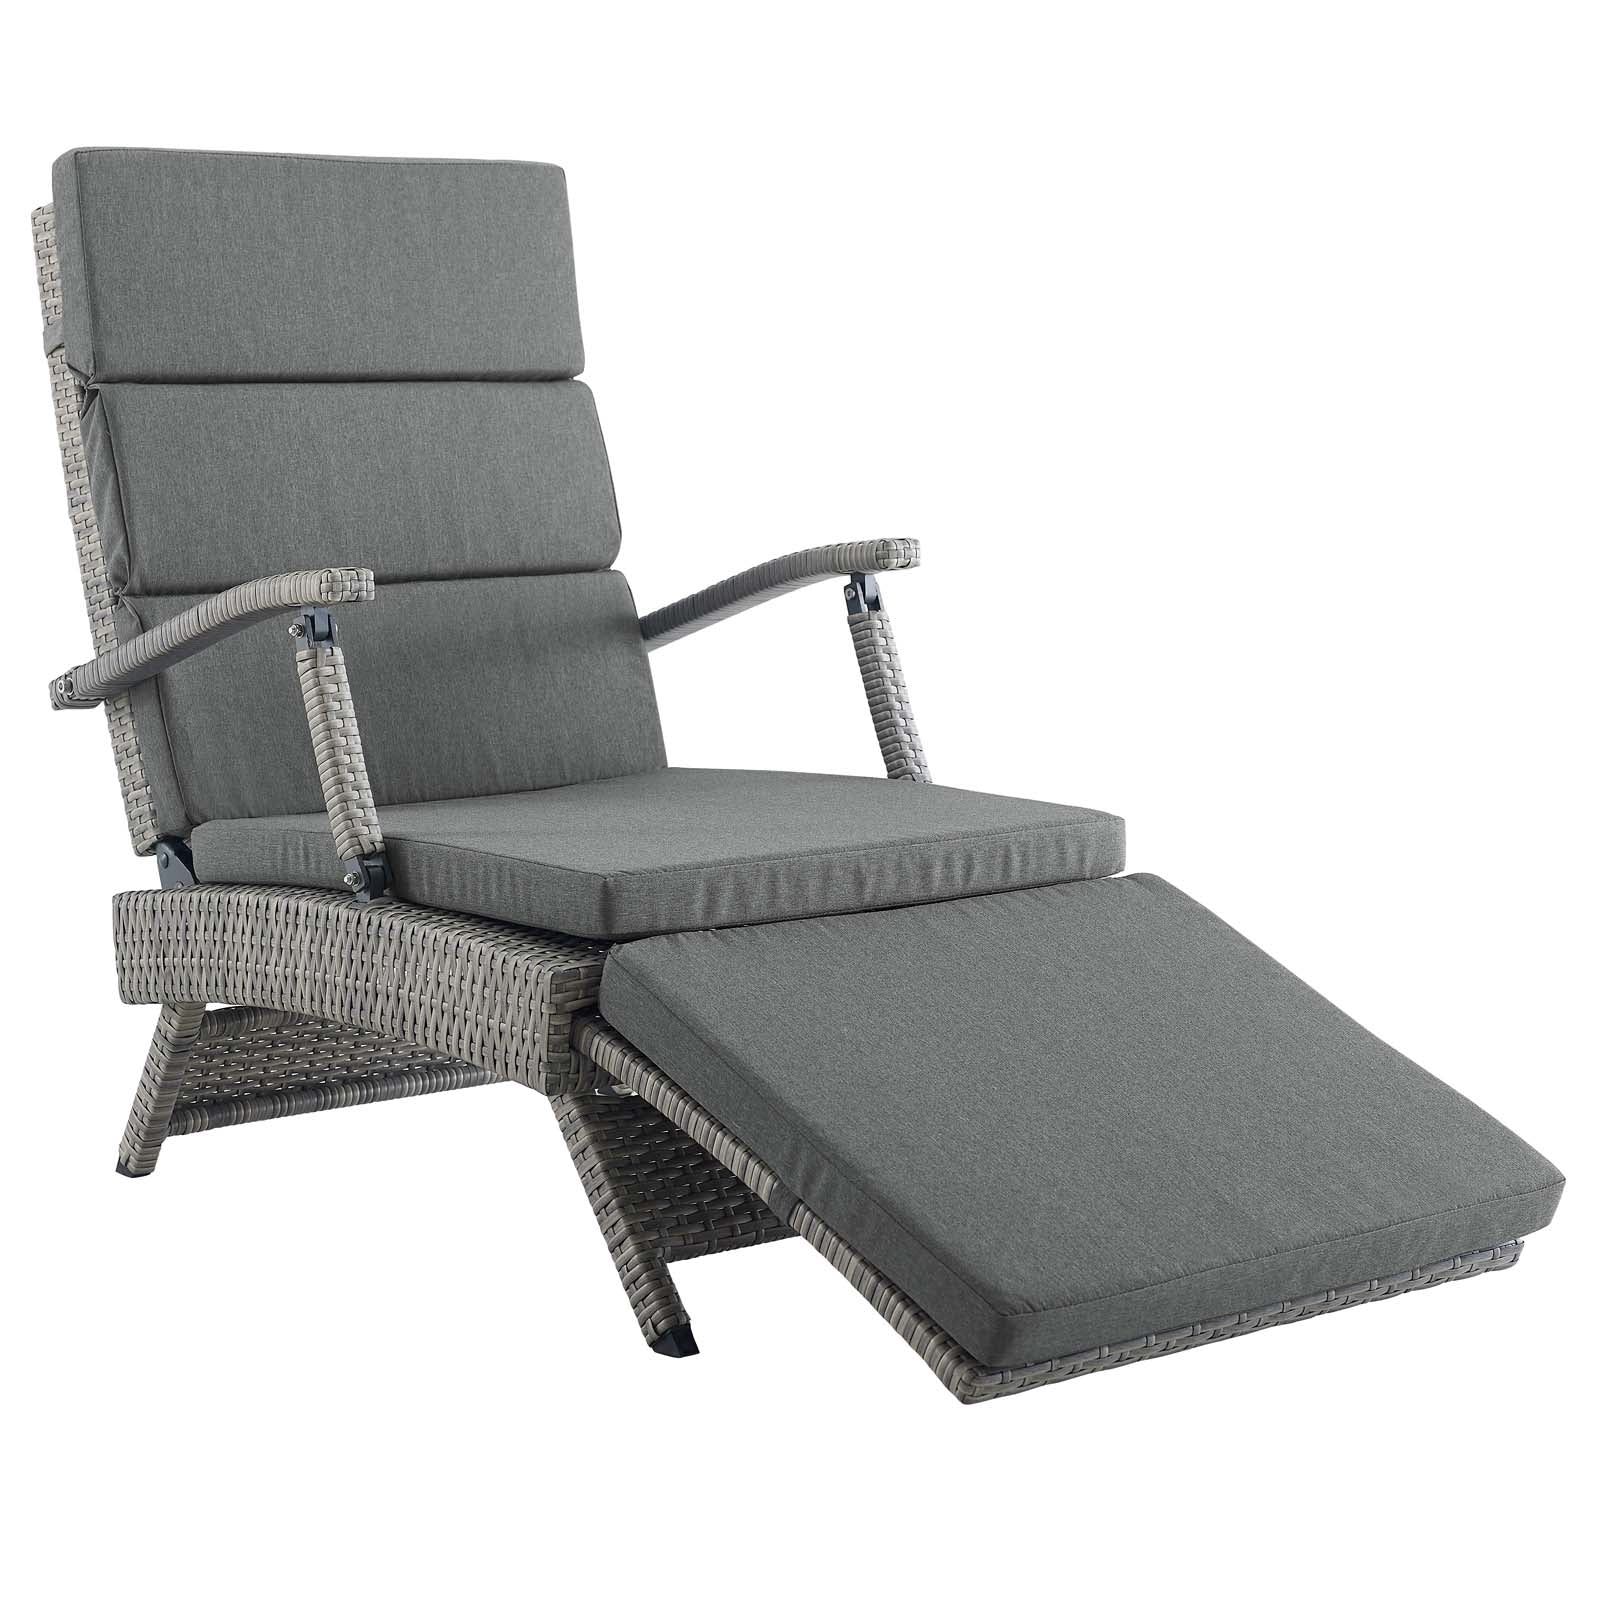 Modway Outdoor Loungers - Envisage Chaise Outdoor Lounge Chair Light Gray & Charcoal